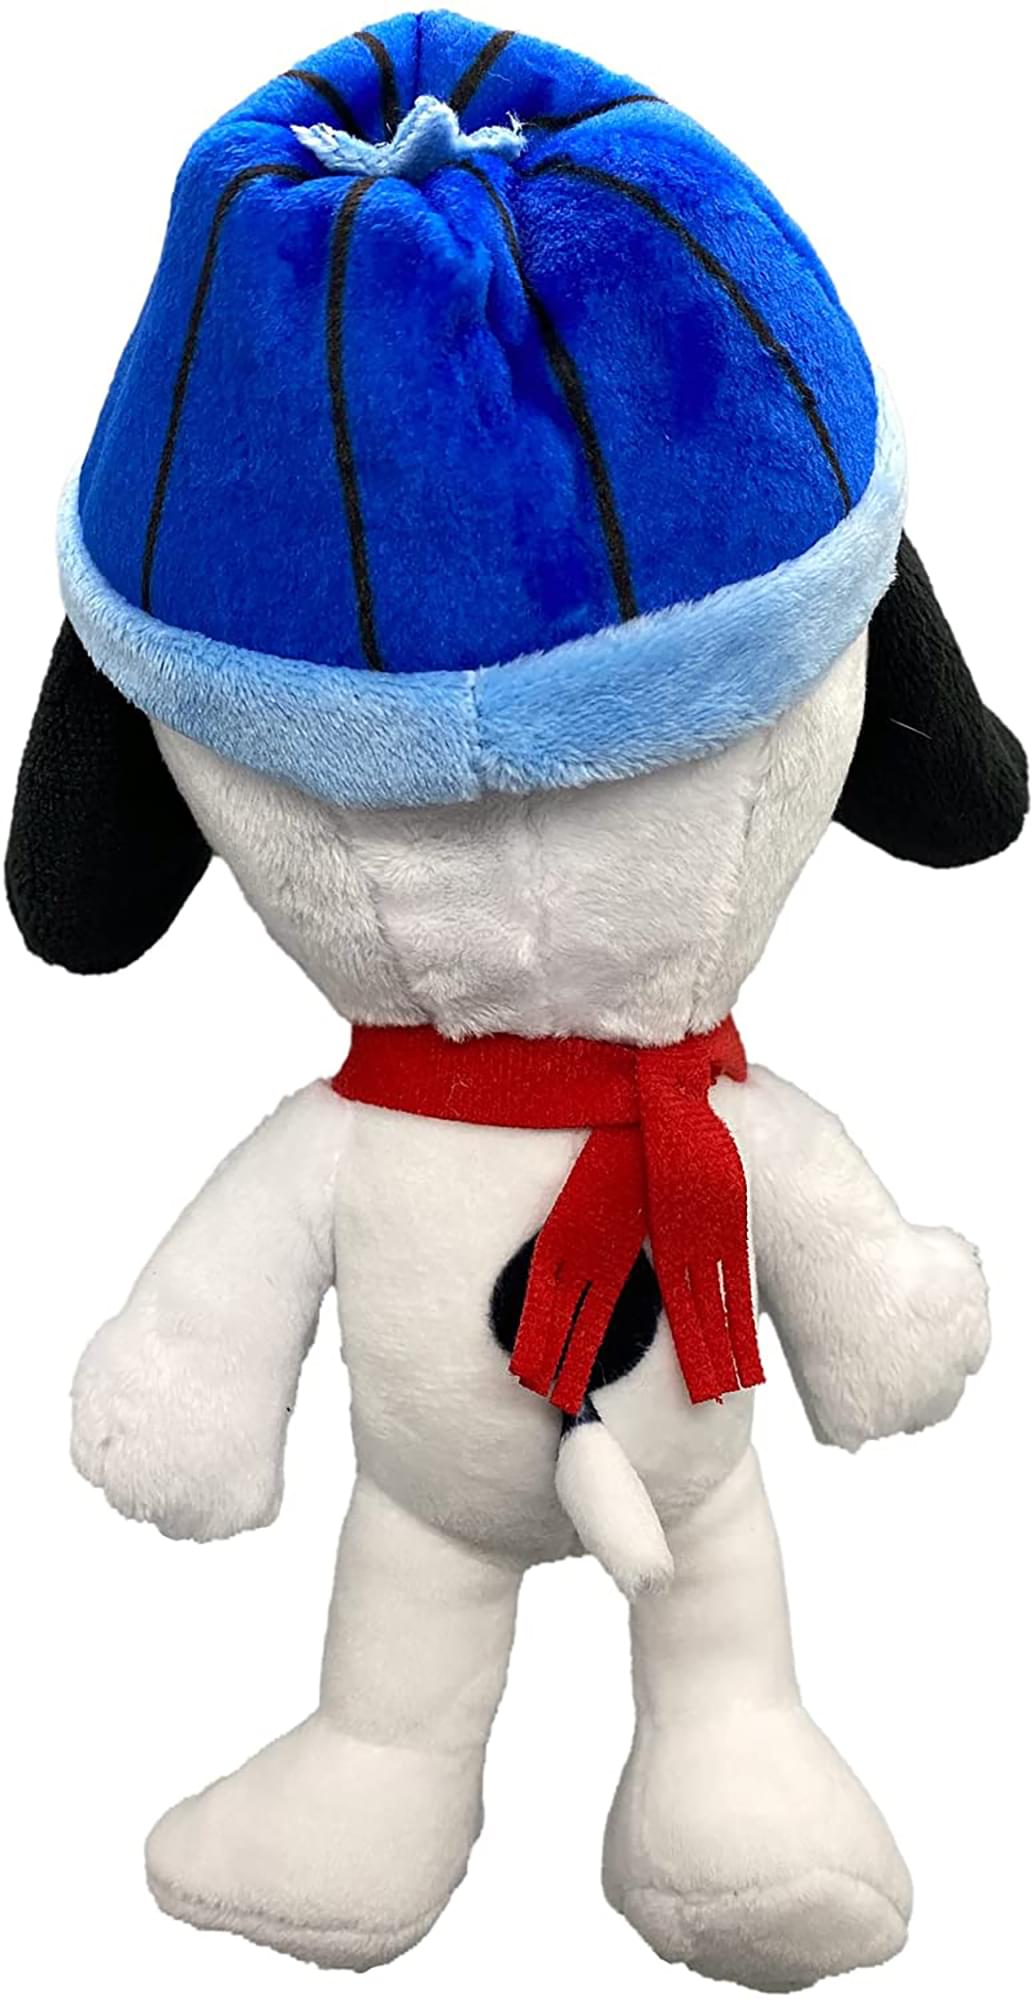 The Snoopy Show 7.5 Inch Plush | Winter Beanie Snoopy